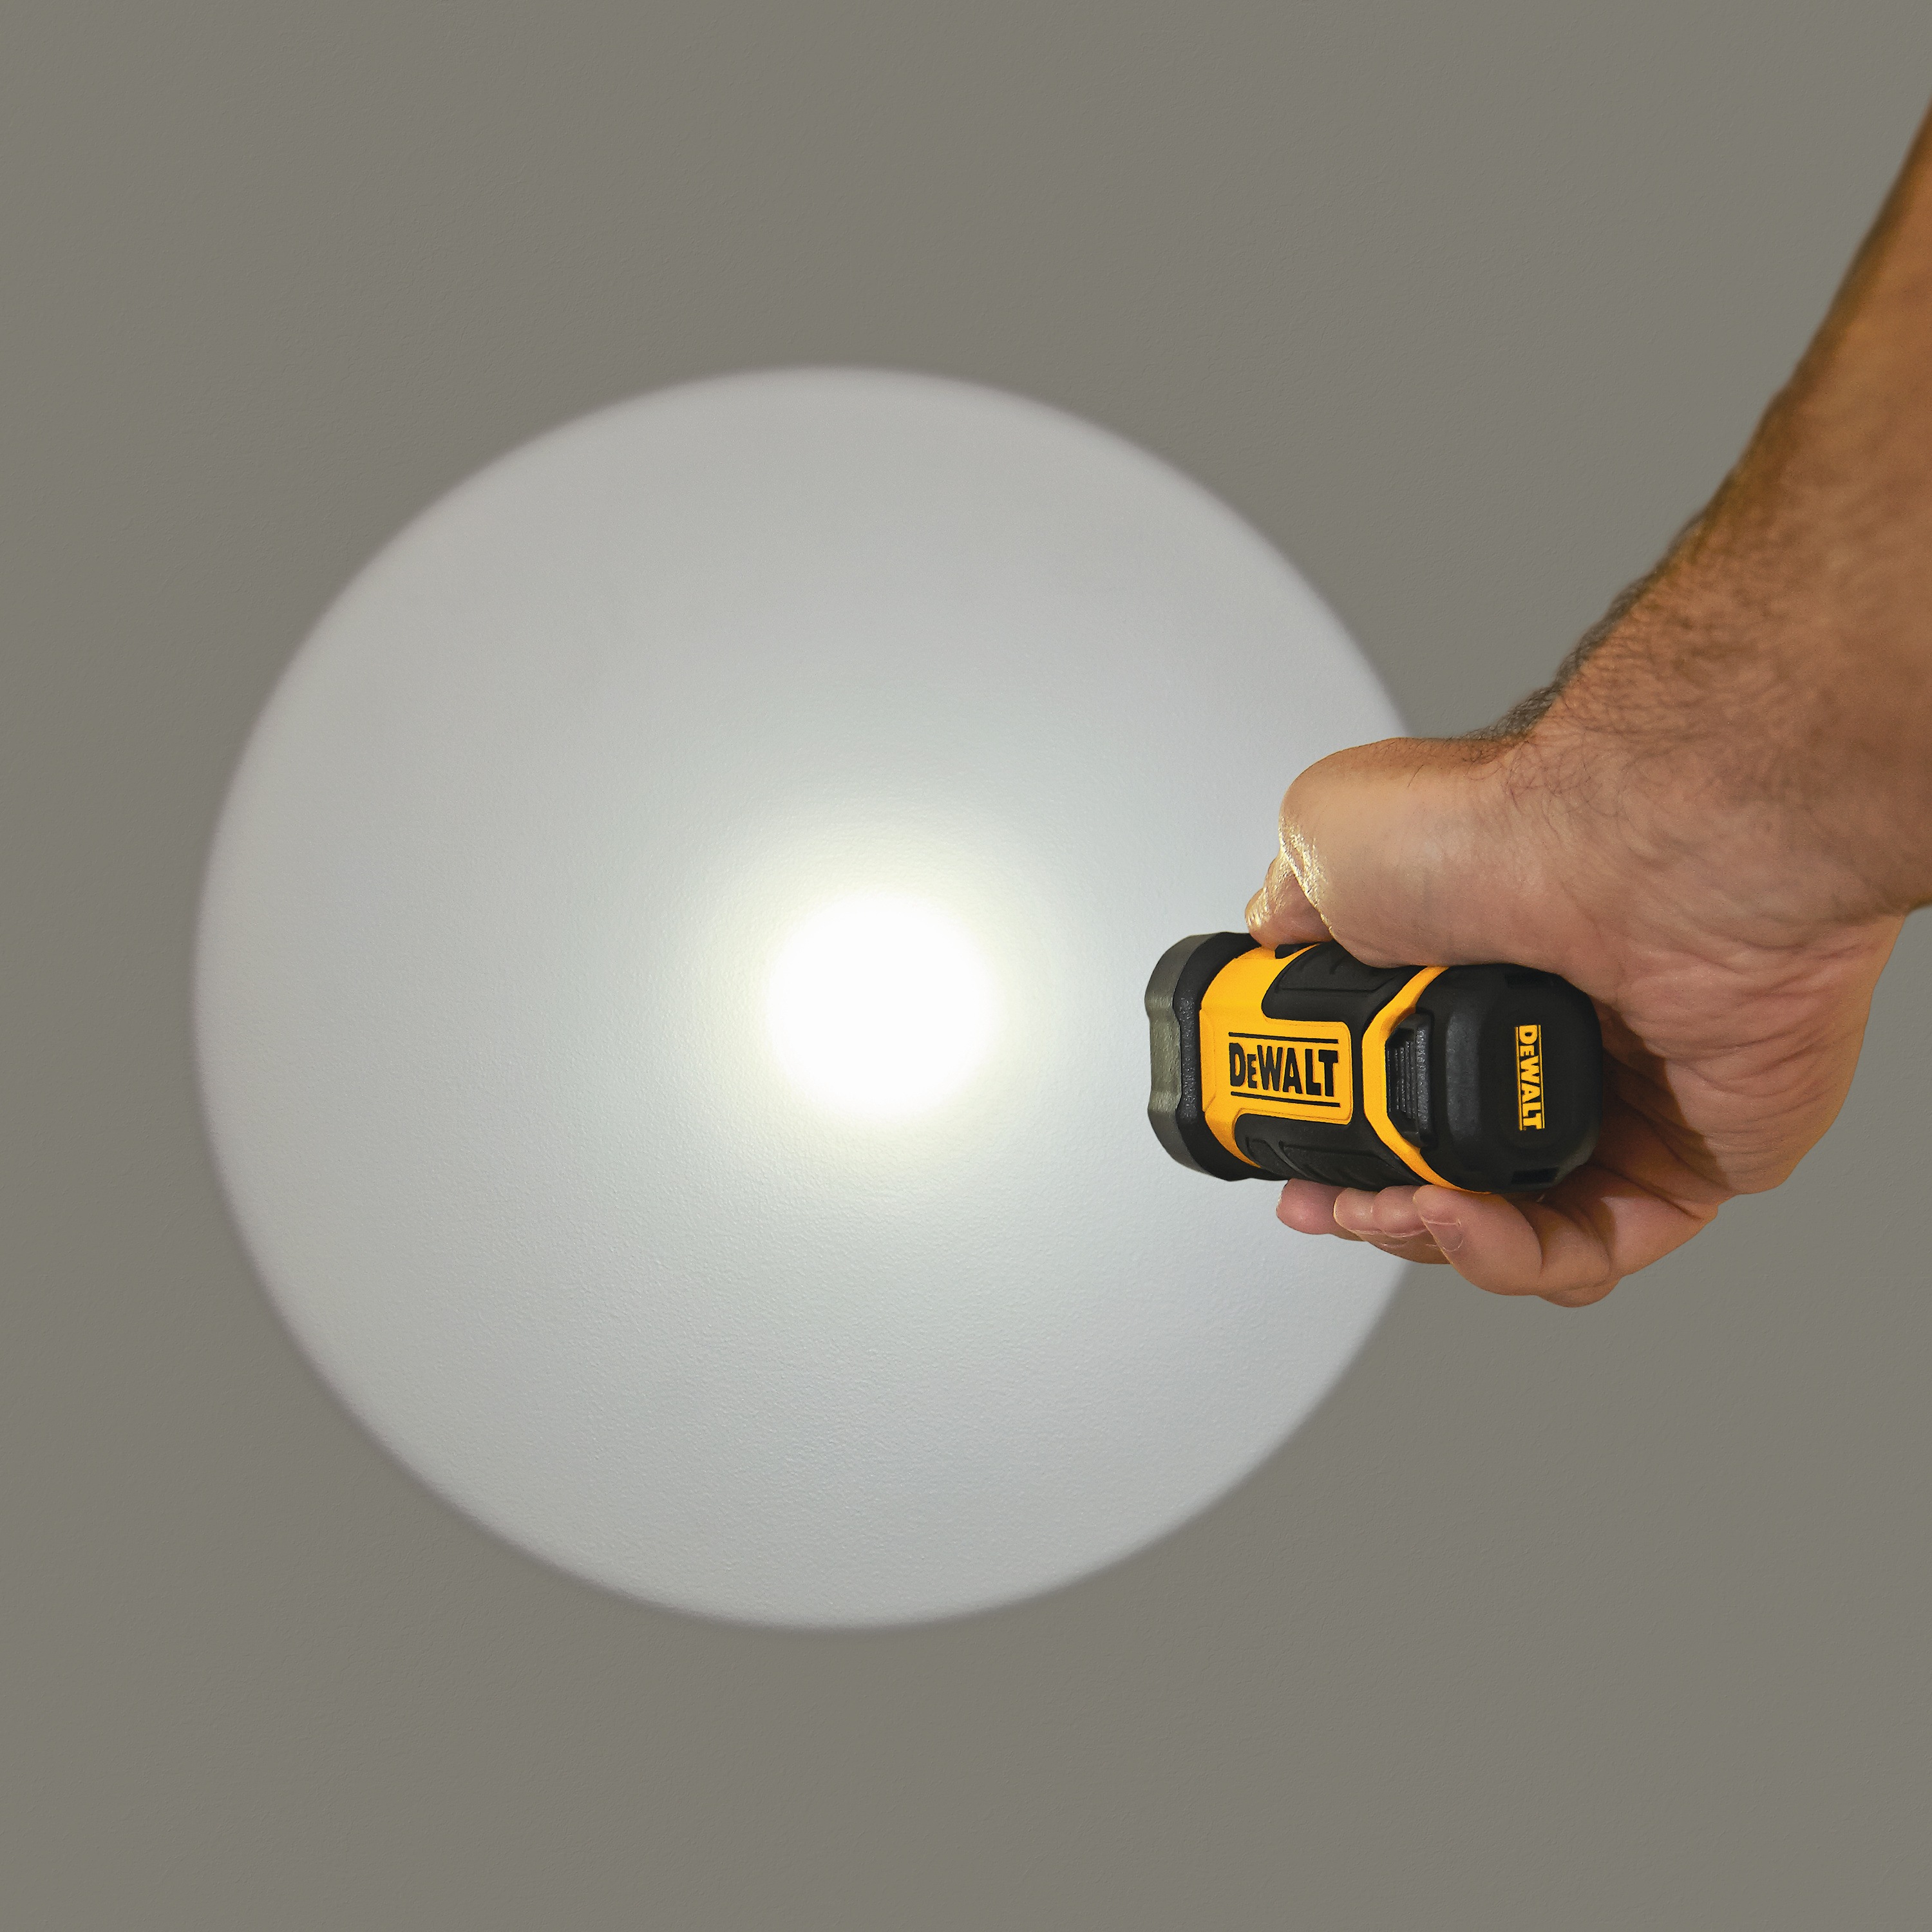 work light being used on a wall